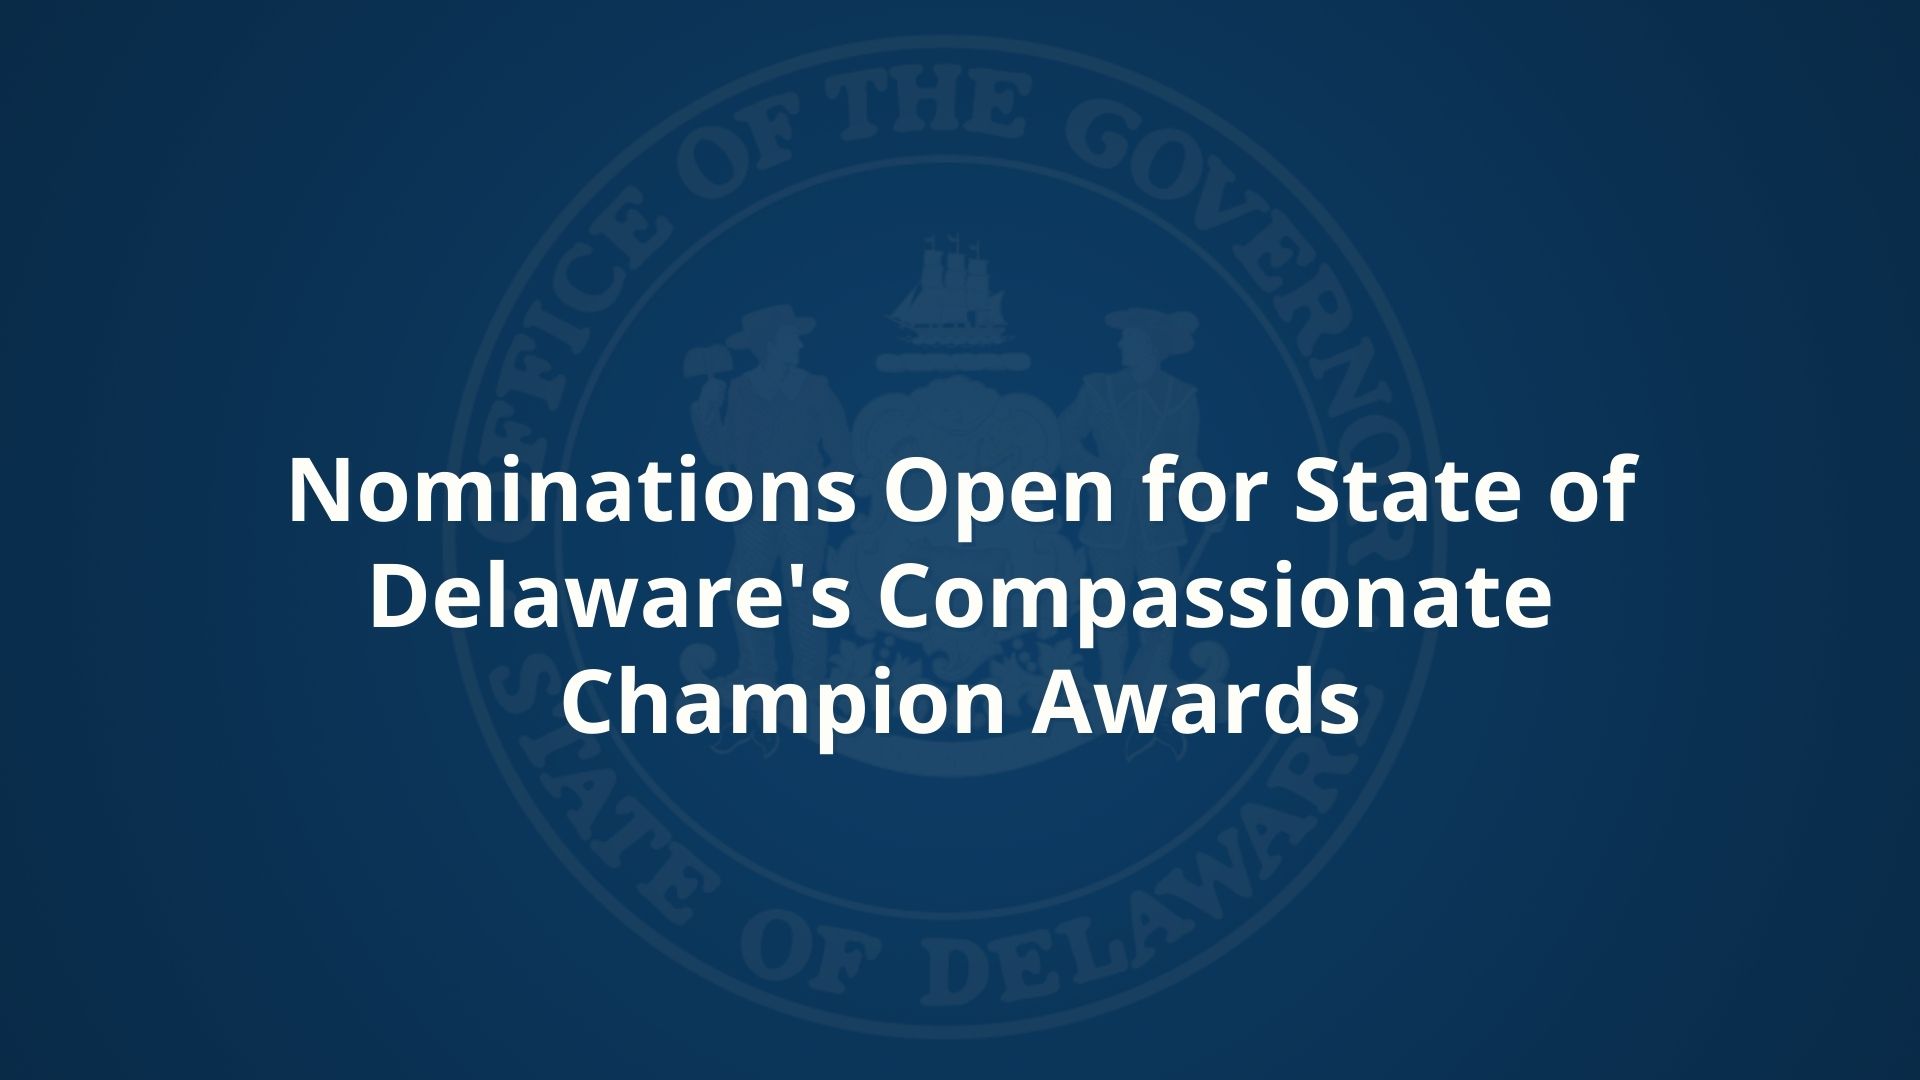 Nominations Open for State of Delaware's Compassionate Champion Awards